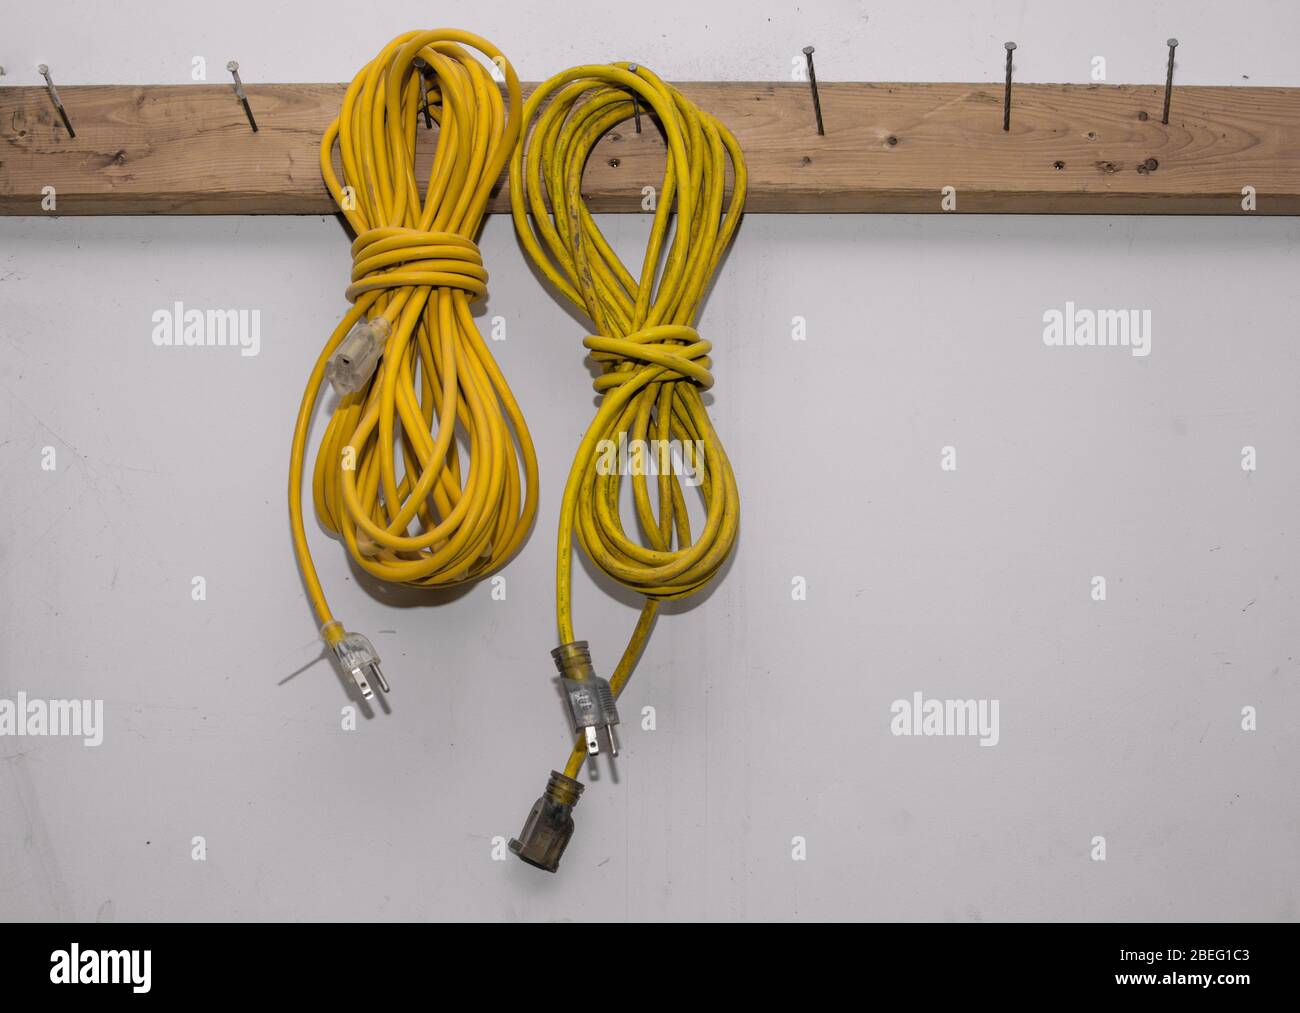 https://c8.alamy.com/comp/2BEG1C3/two-yellow-electrical-extension-cords-hanging-in-a-workshop-2BEG1C3.jpg